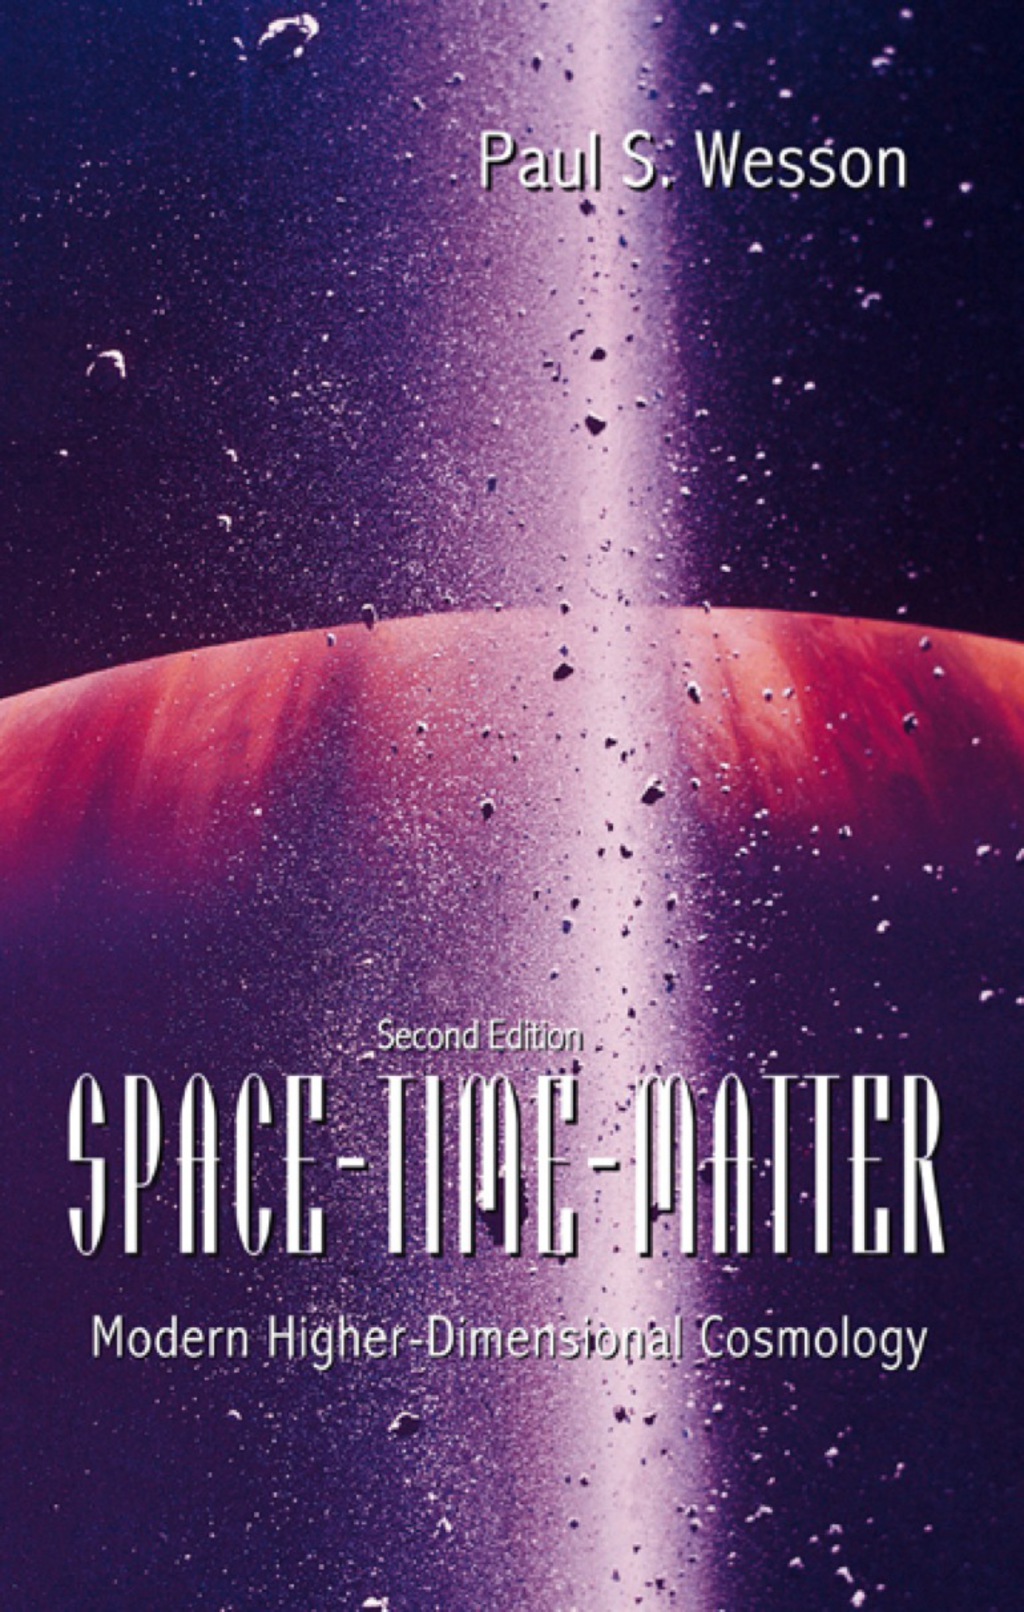 SPACE-TIME-MATTER: MODERN HIGHER-DIMENSIONAL COSMOLOGY (2ND EDITION) - 2nd Edition (eBook)